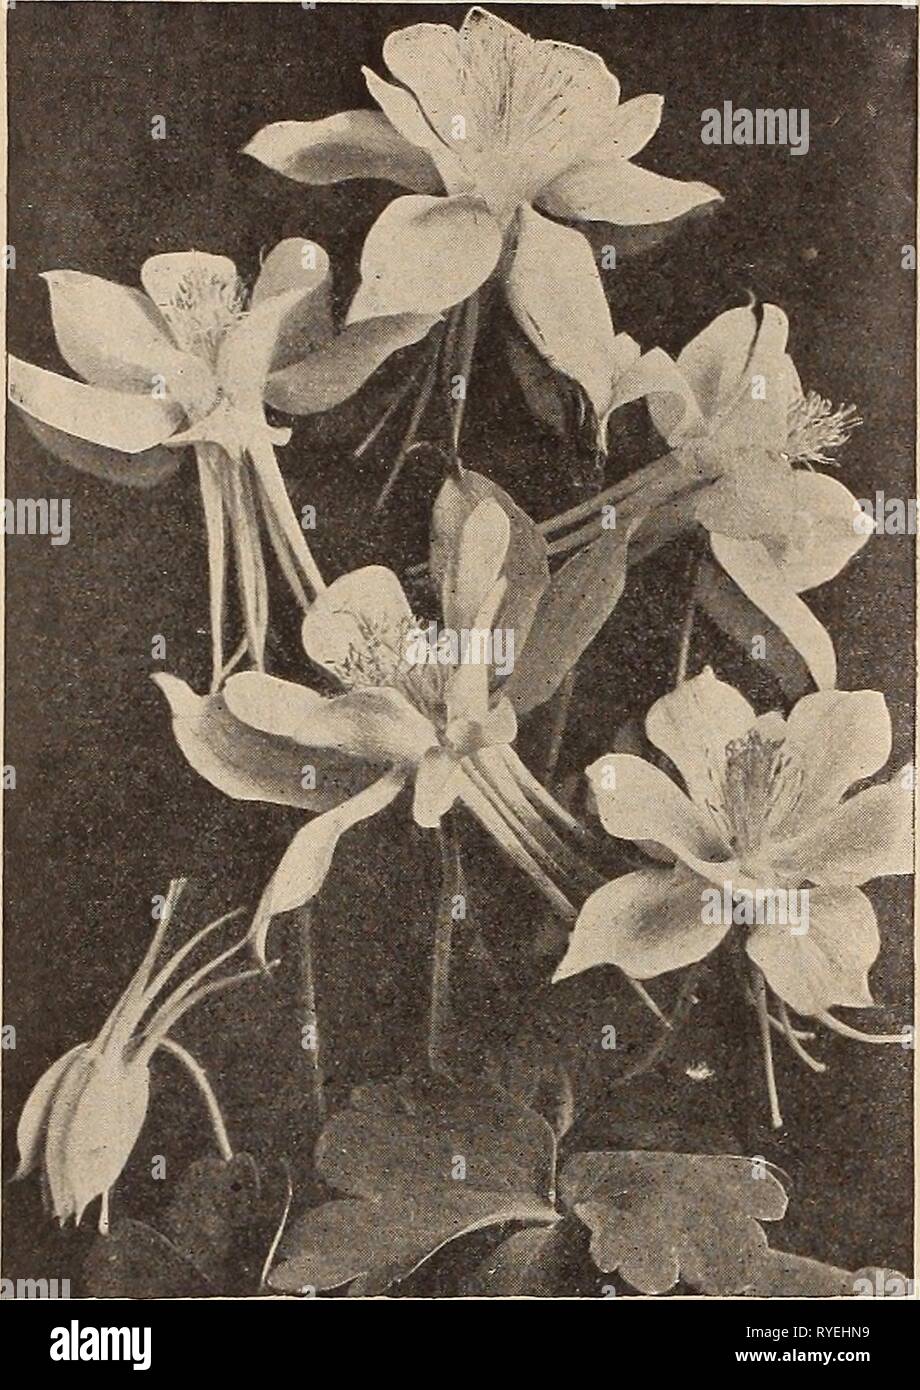 Dreer's wholesale price list : bulbs for florists plants for florists flower seeds for florists florists' requisites  dreerswholesalep1919henr Year: 1919  16 HENRY A. DREER, PHILADELPHIA, PA., WHOLESALE PRICE LIST    AQUILEGIA OH COLUMBINE Aquilegia (Columbine). Perdoz. Per 100 Canadensis. Our native Columbine, bright red and yellow *l BO $10 00 Ccerulea. The true blue Rocky Mountain Columbine. 1 50 10 00 Chrysantba. The beautiful golden-spurred Columbine 1 50 10 00 Flabellata Nana Alba. Early dwarf, pure white. . 1 50 10 00 Helens. Large blue and white flowers 1 60 10 CO Long Spurred Hybrids. Stock Photo